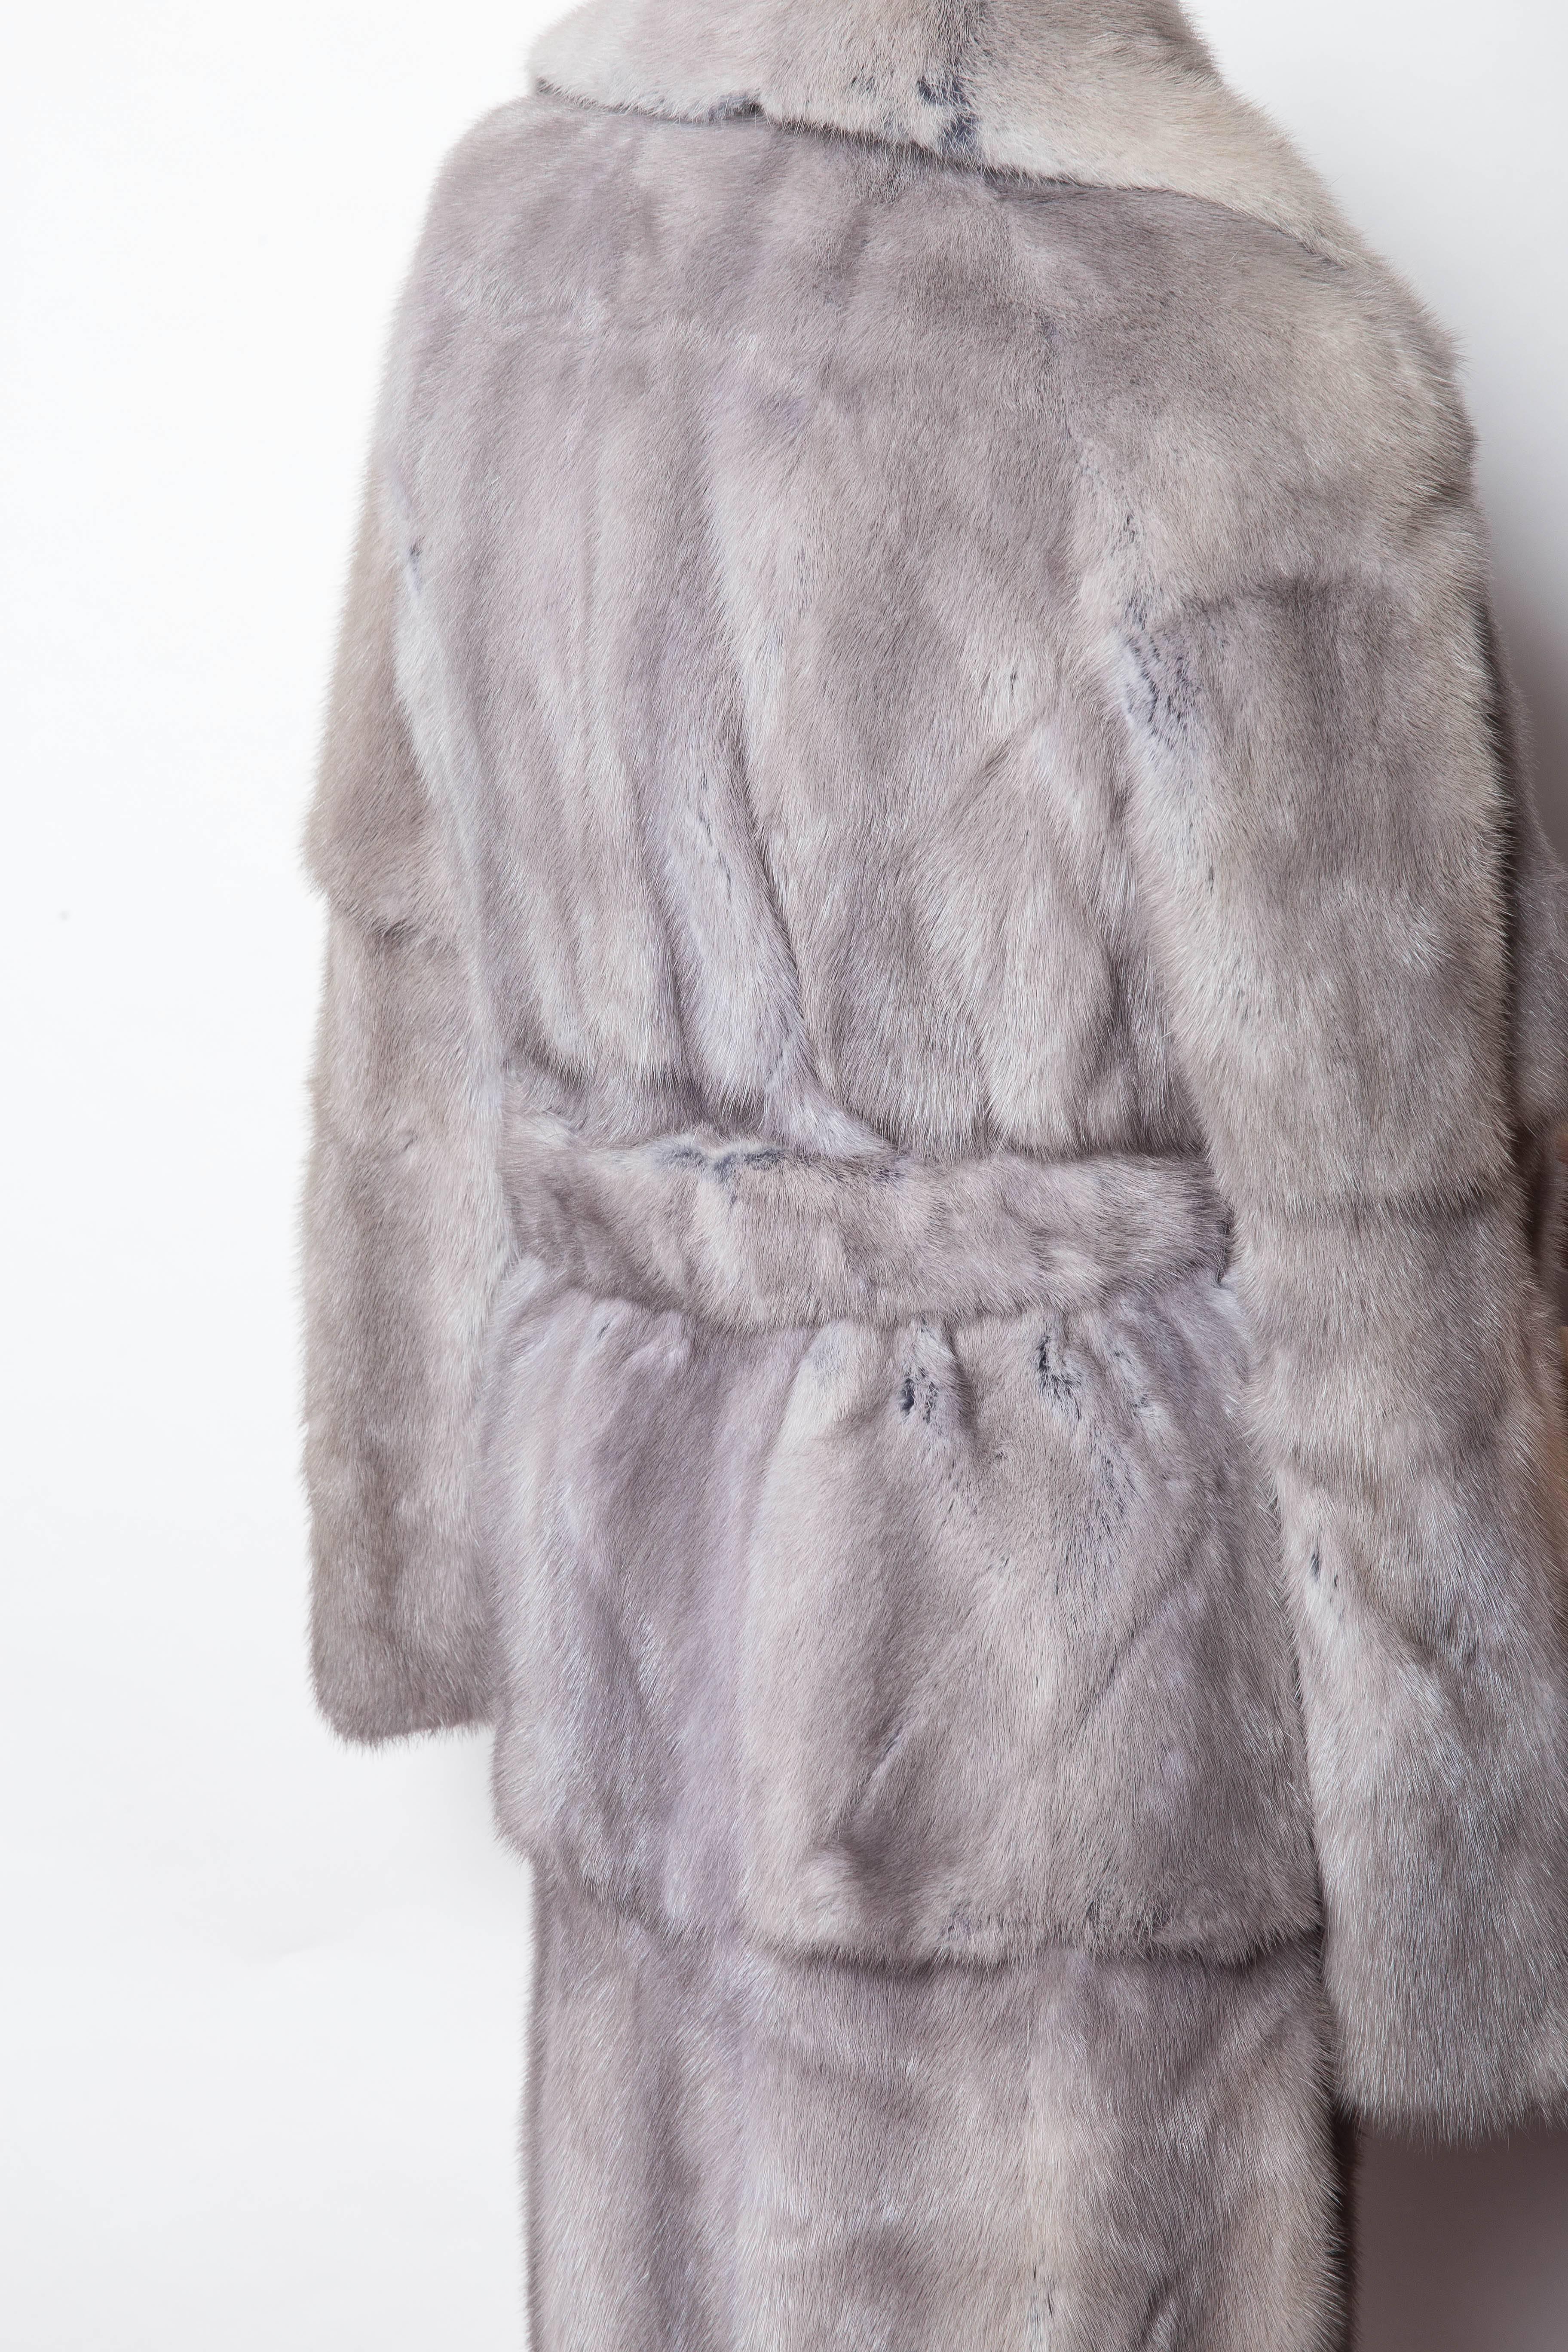 Gray Fendi Runway Pearl Mink Coat with Blue Suede Accents